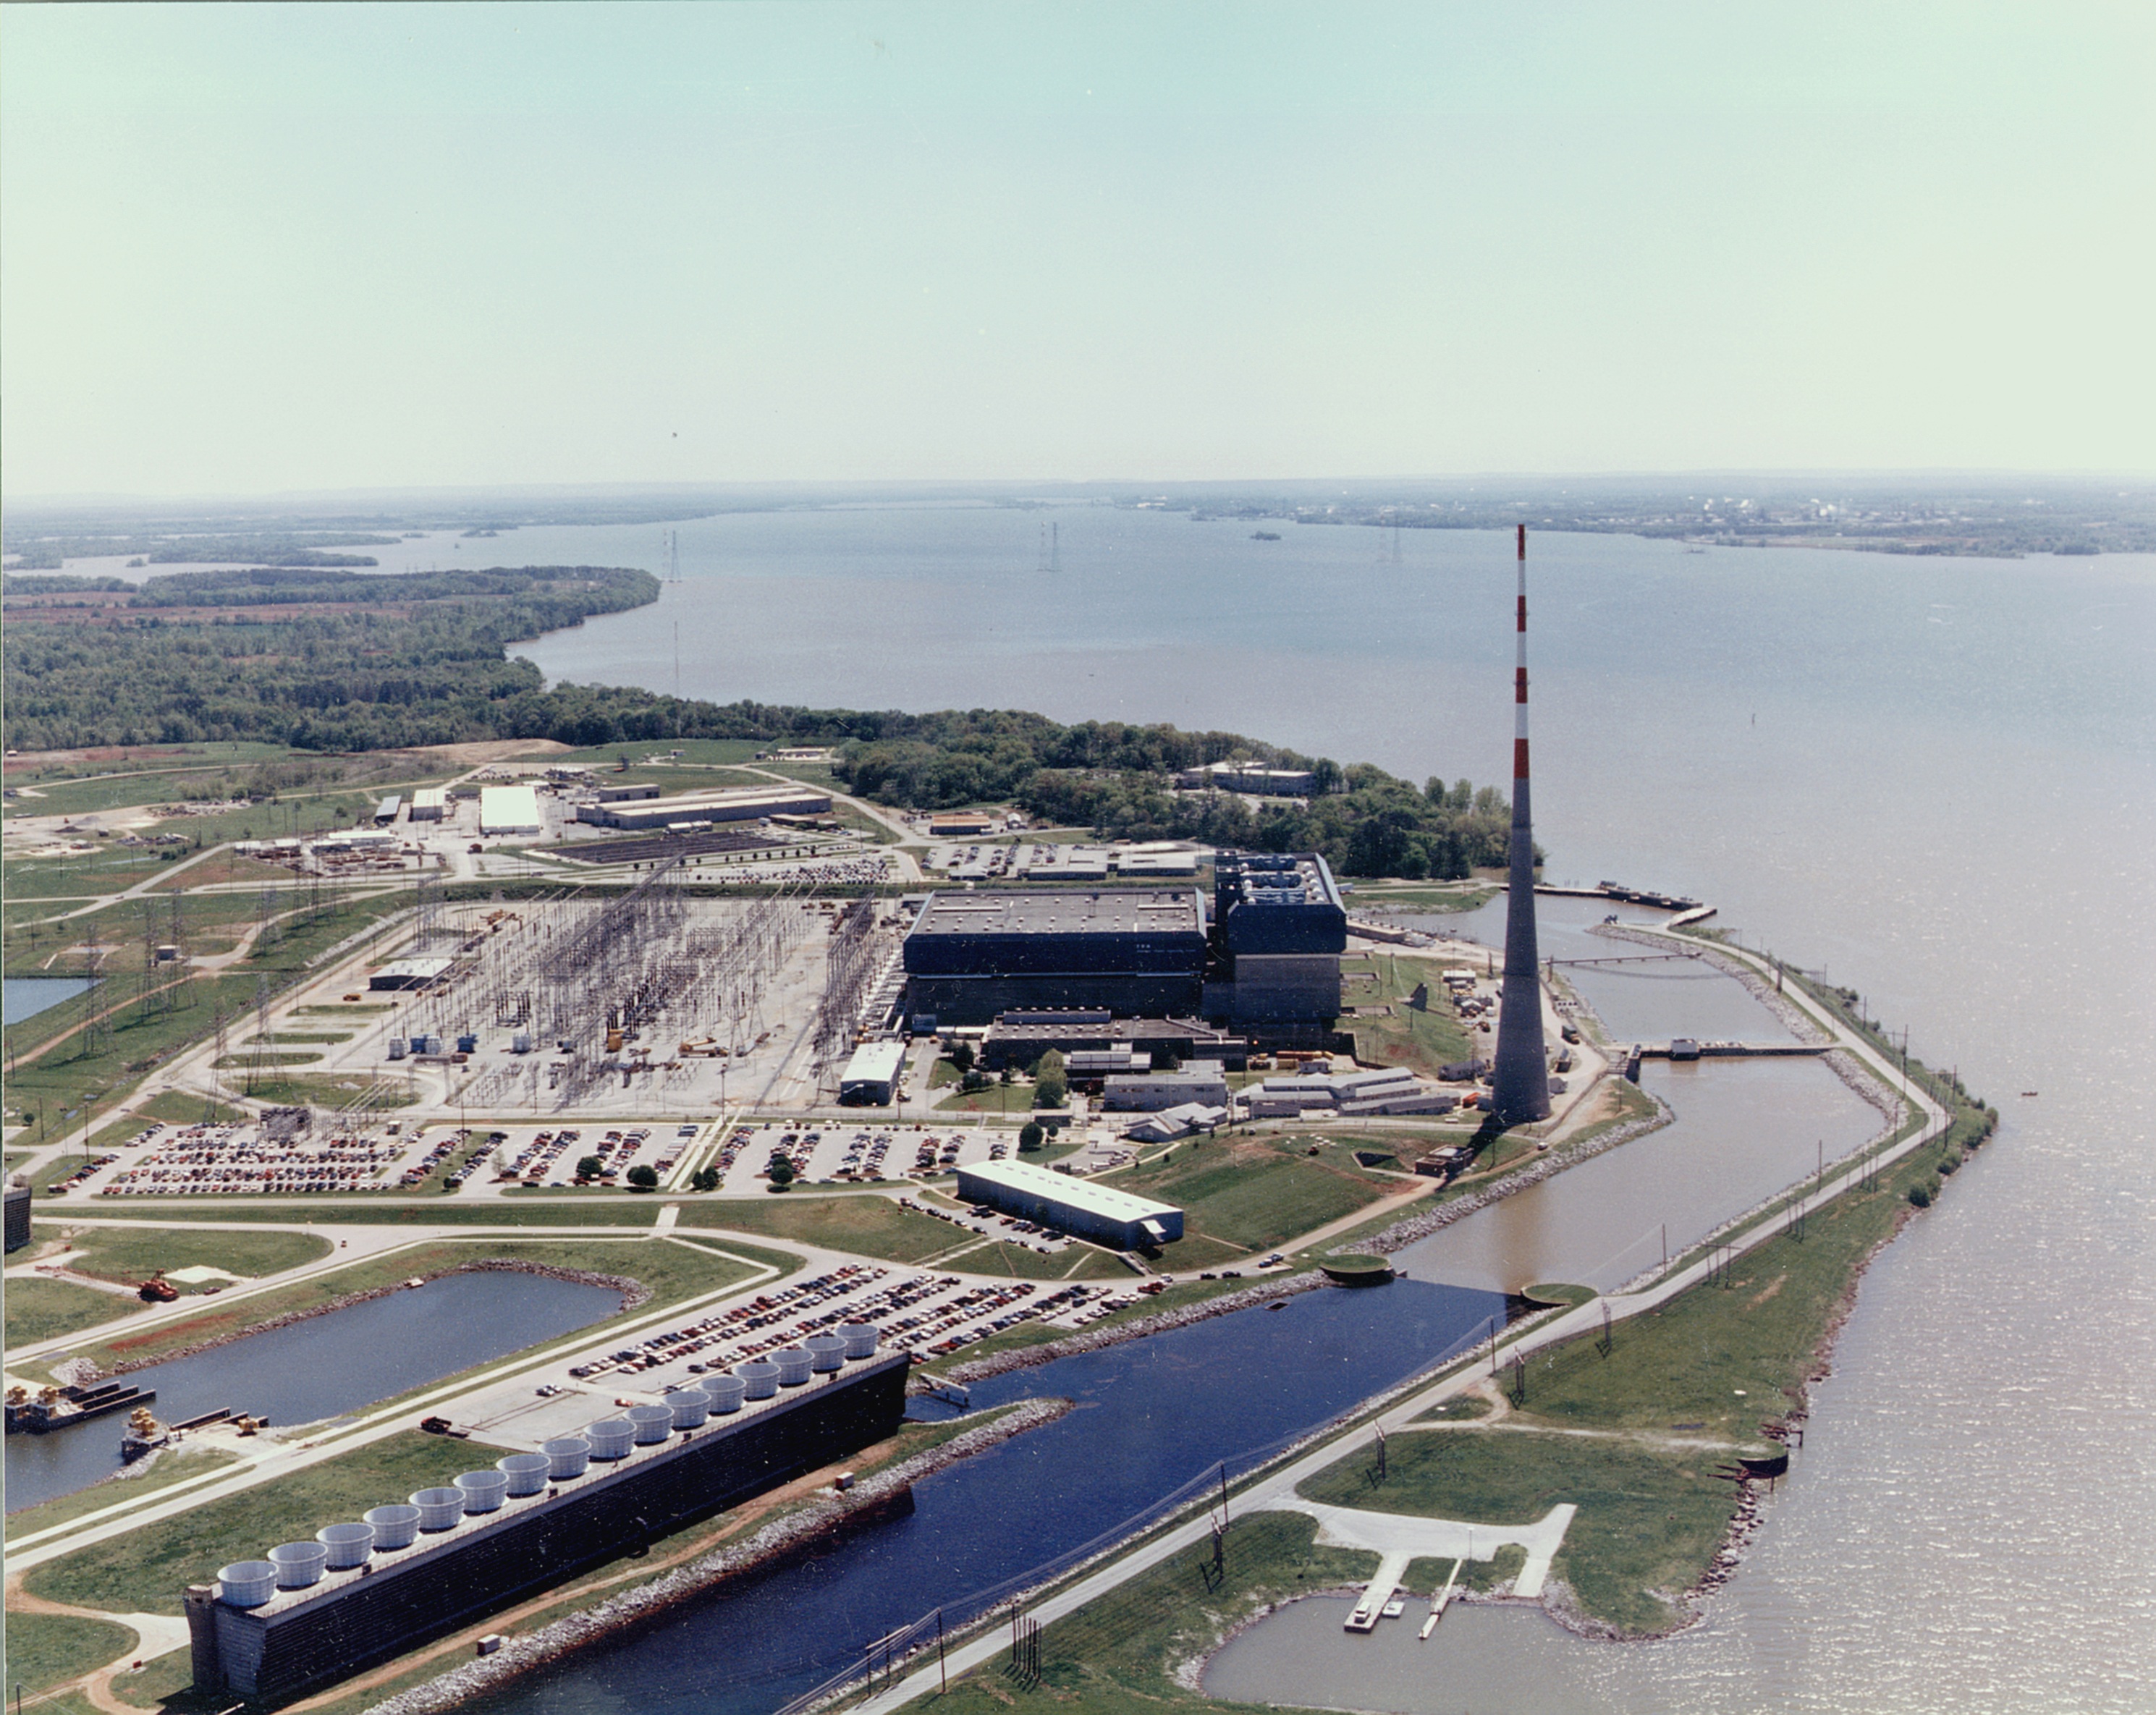 2007 – Browns Ferry Nuclear Power Plant Becomes the First U.S. Nuclear Reactor to Come Online in the 21st Century.